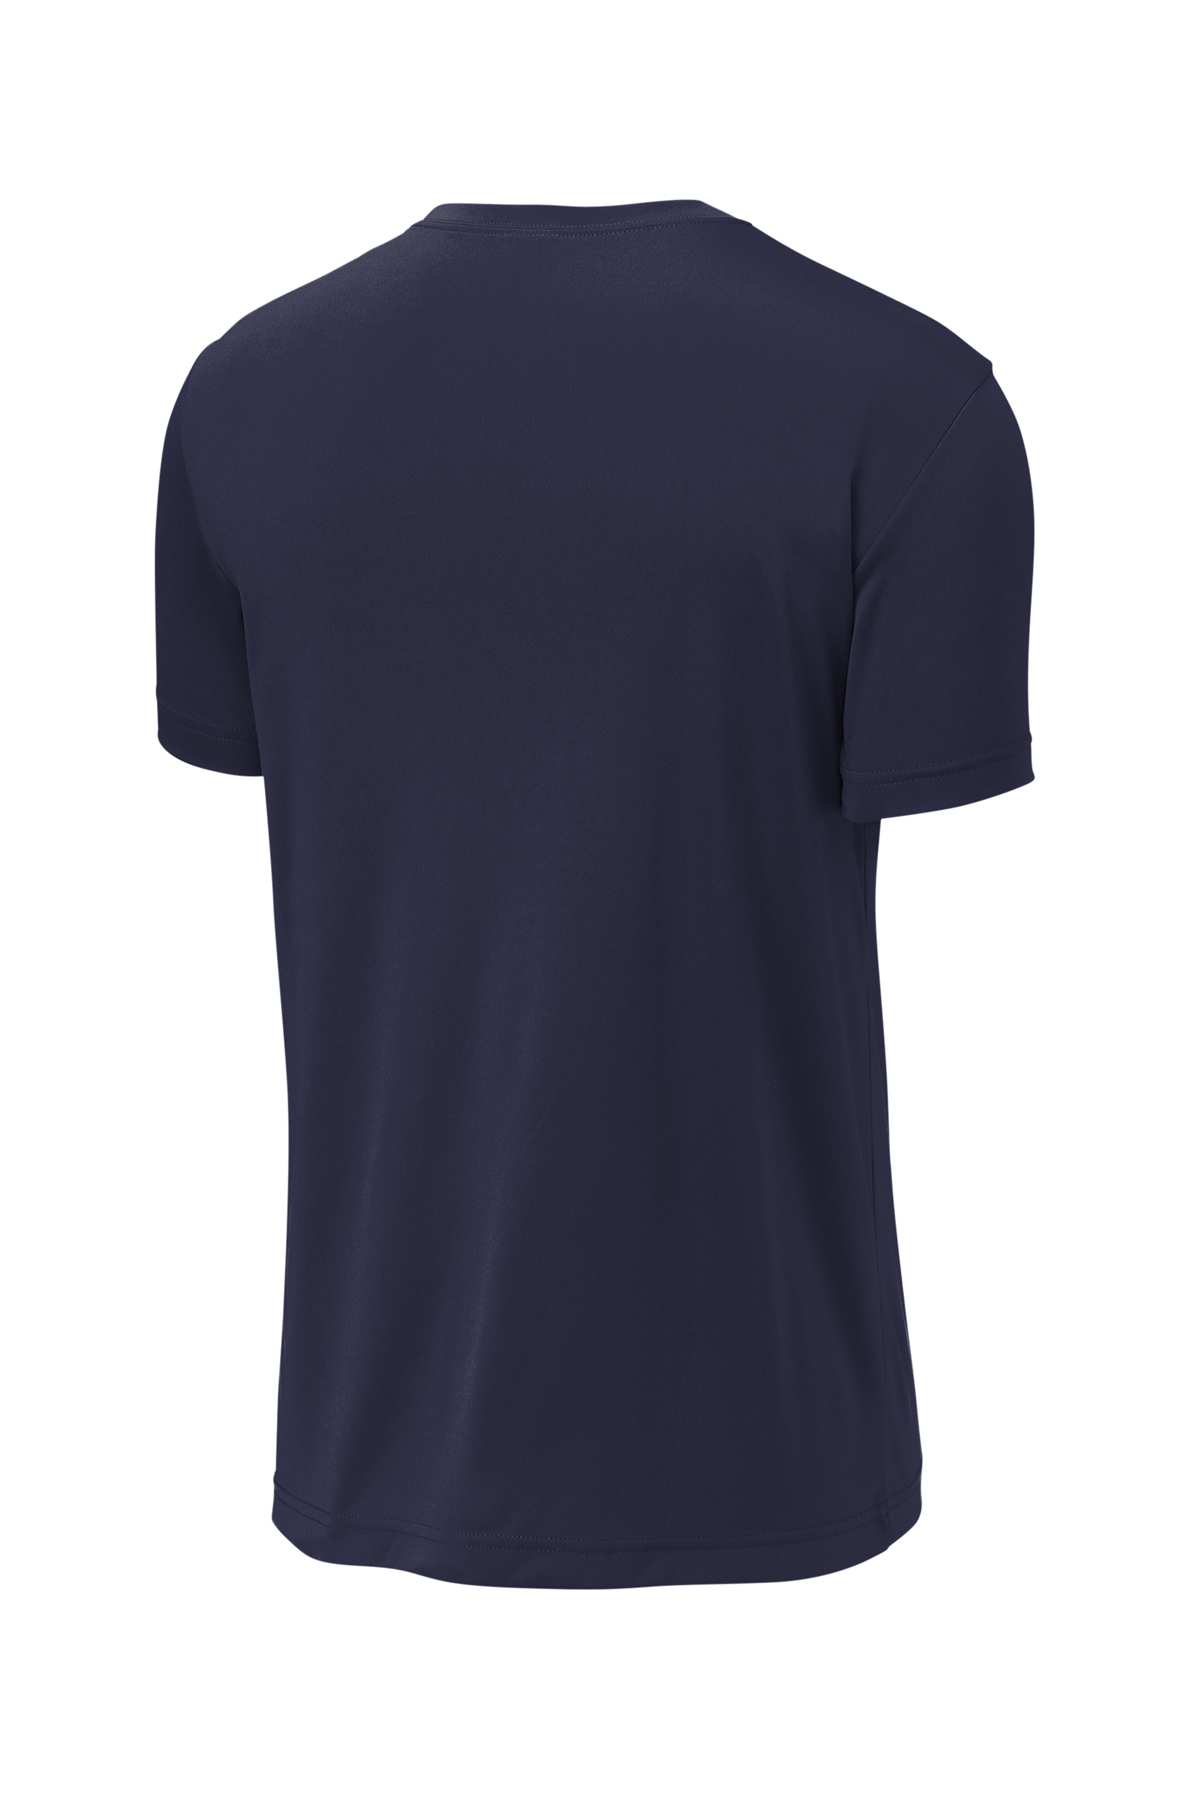 Sport-Tek PosiCharge Re-Compete Tee | Product | Company Casuals